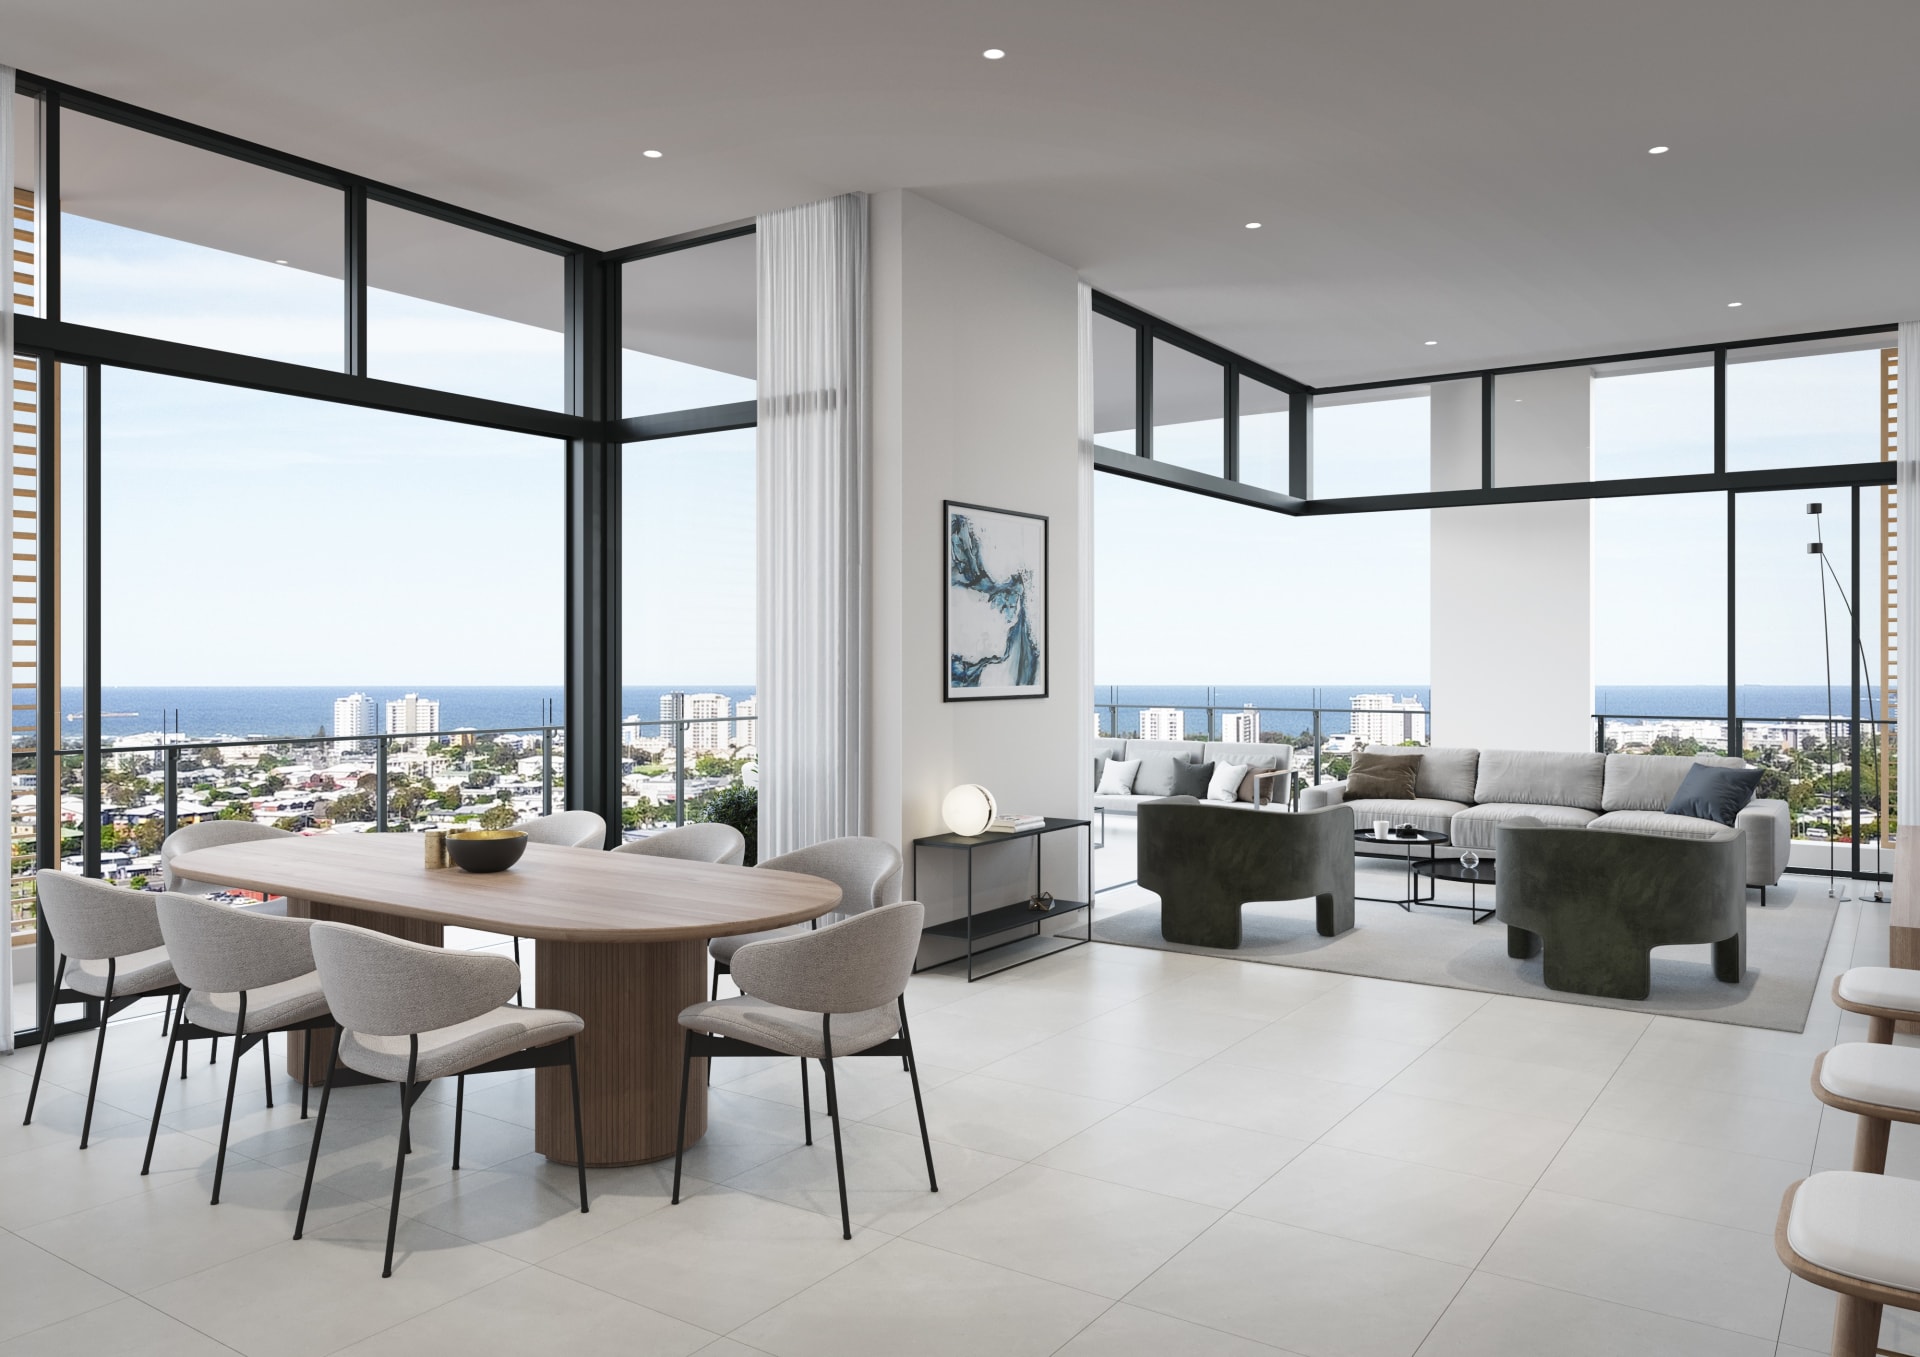 Habitat Development Group launch The Corso apartments in the heart of Maroochydore